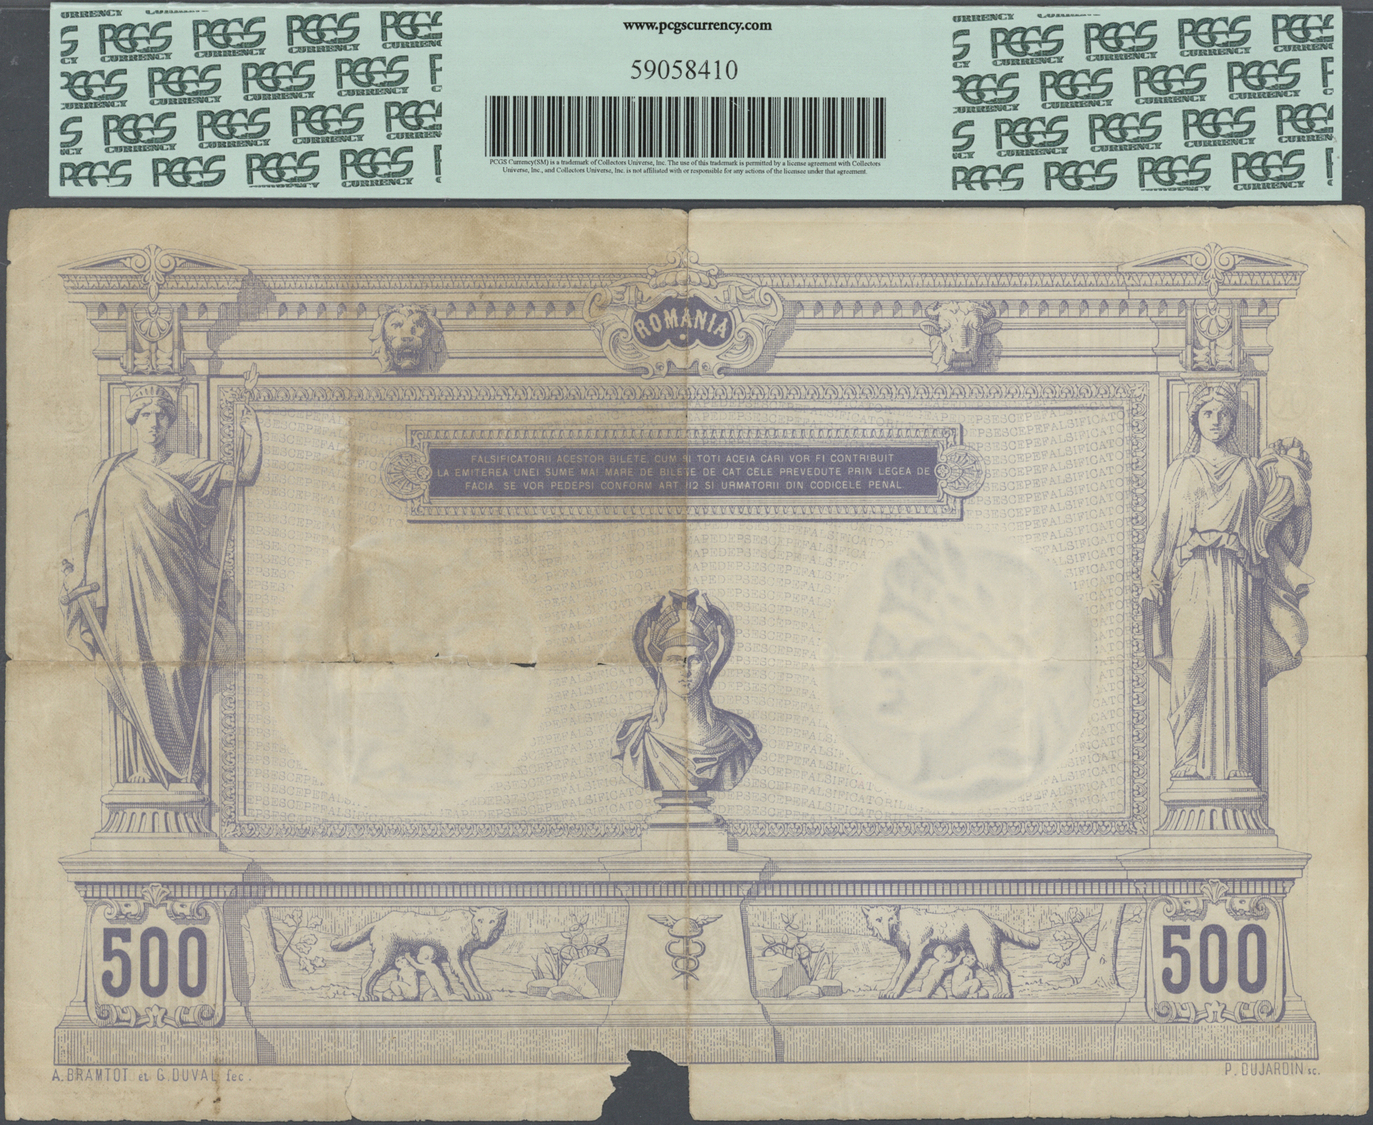 02039 Romania / Rumänien: Rare Banknote 500 Lei 1877 P. 6b, 3 Signatures, Bilet Hypothecar, Used With Folds And Creases, - Romania